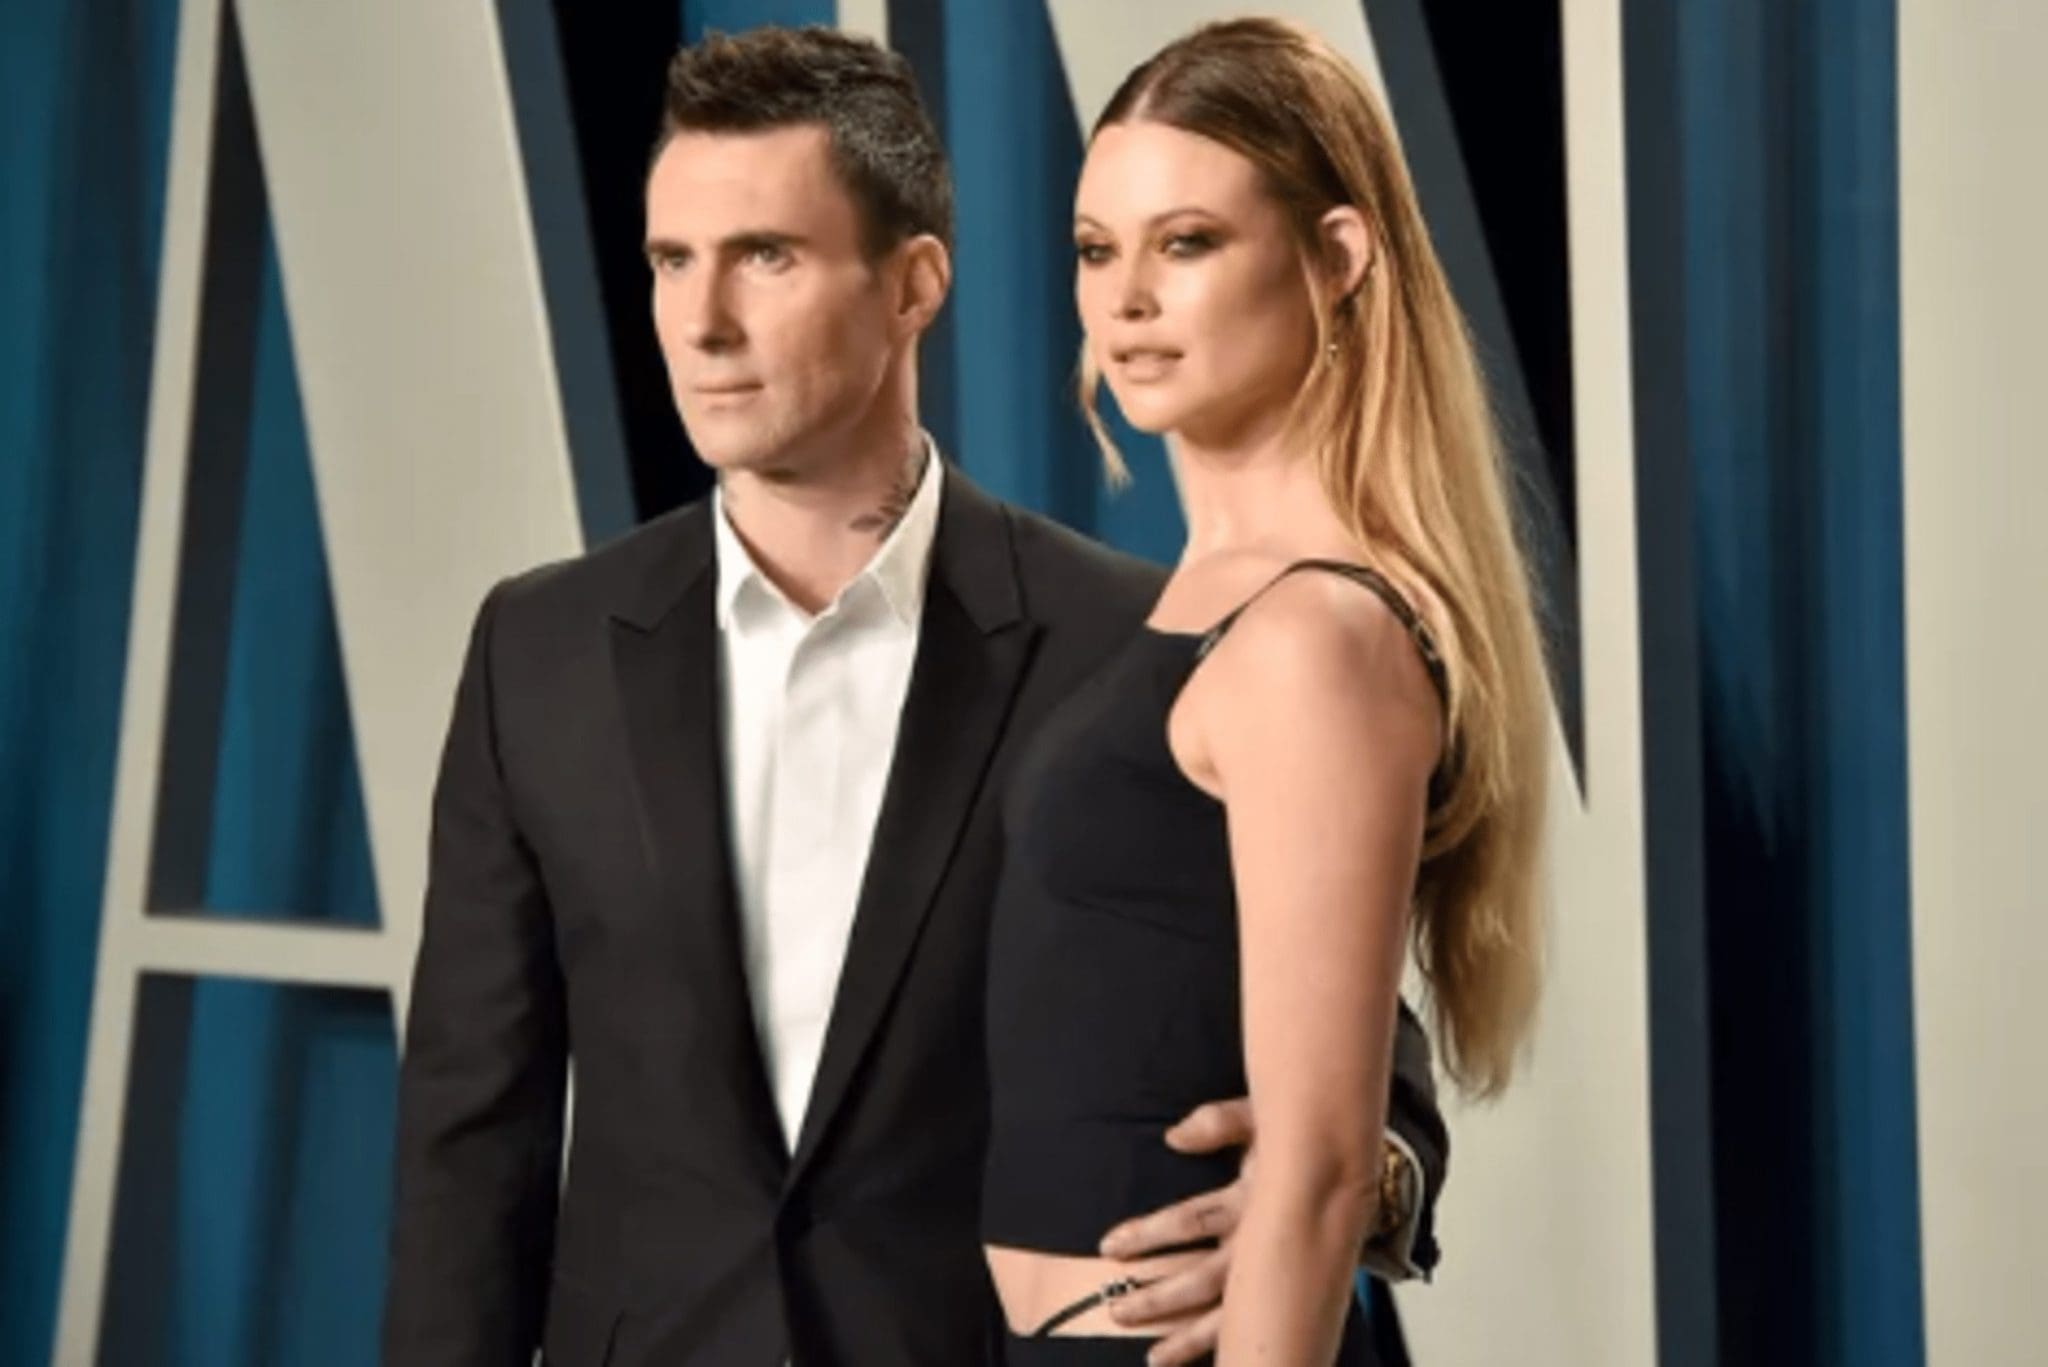 Adam Levine Is Making An Effort To Make Things Better Despite The Current Predicament